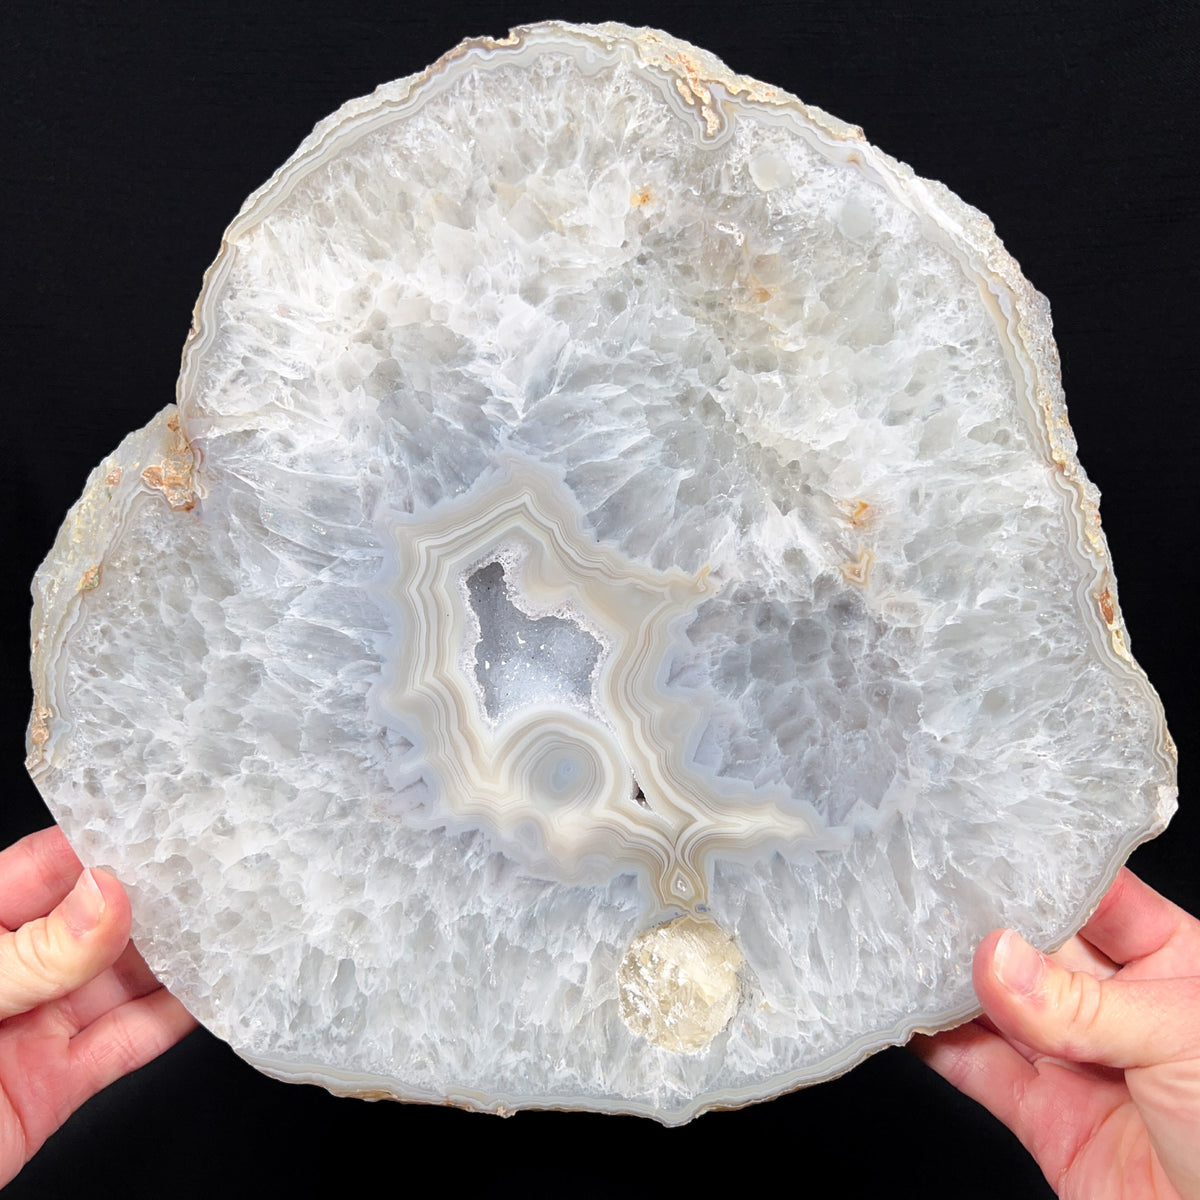 Large Thick Cut Agate Geode Slab with Quartz and Calcite